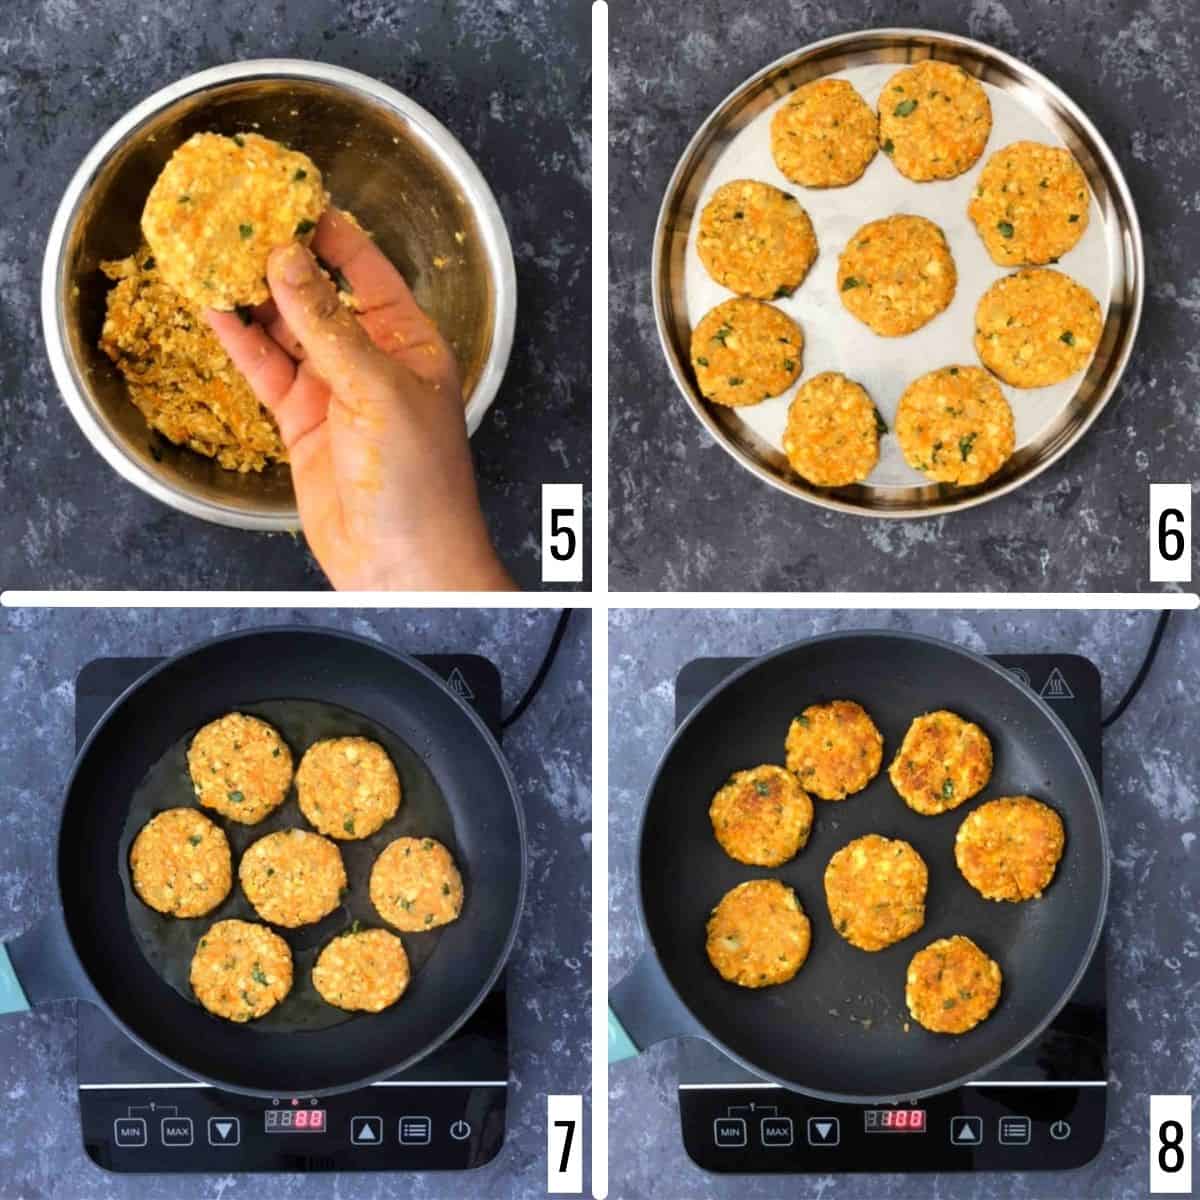 A 4-step collage showing the shaping and frying of the tikki.